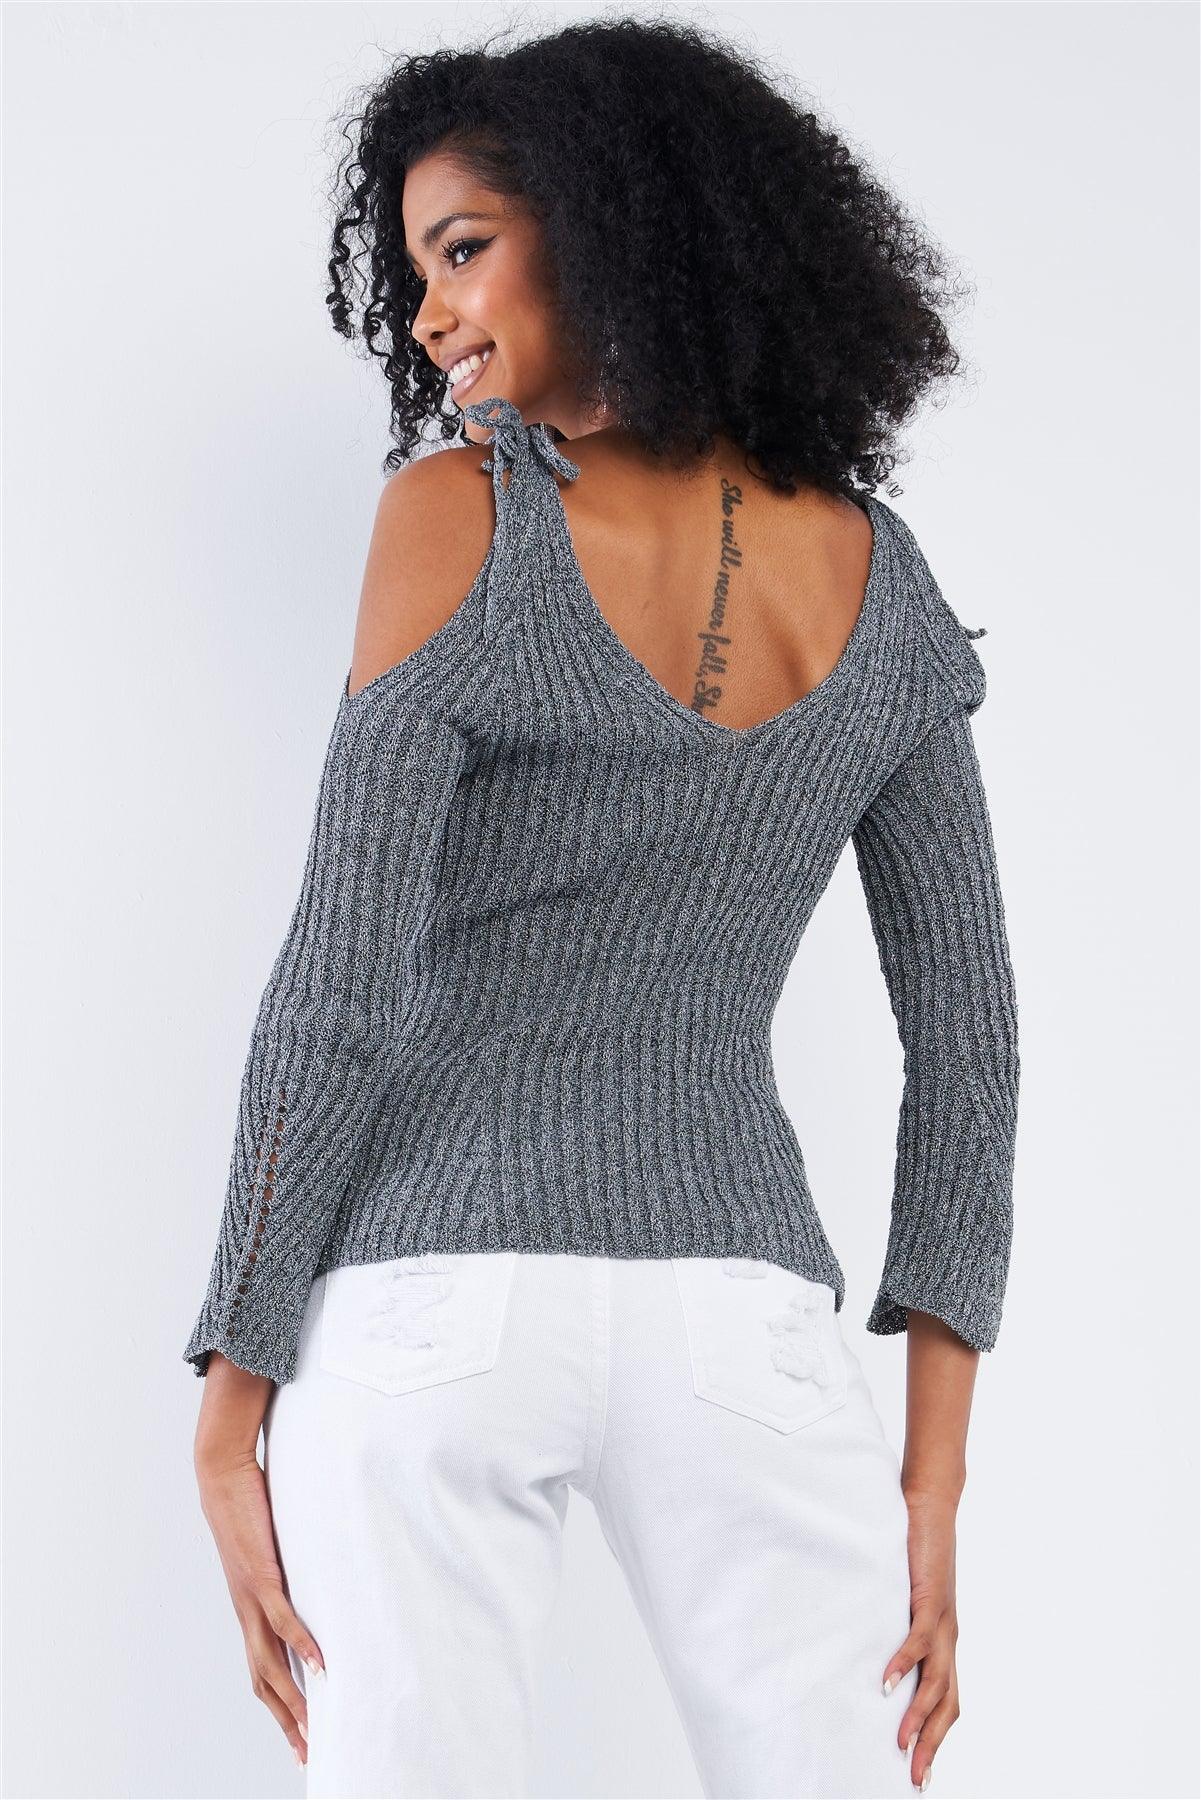 Concrete Grey Silver Tinsel Knitted Peek-A-Boo Self Tie Shoulder Top